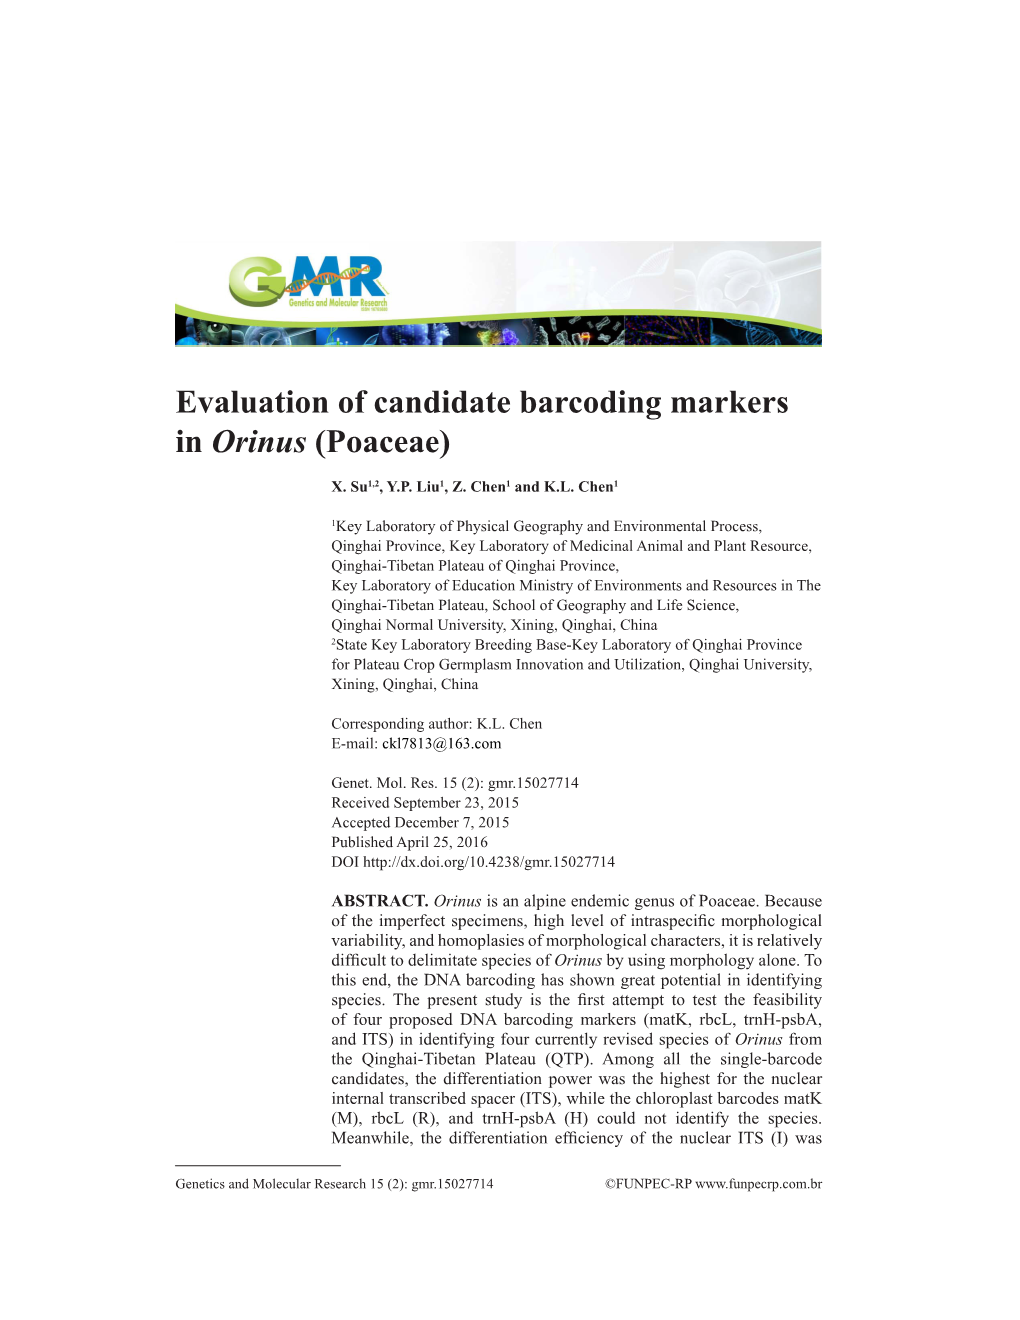 Evaluation of Candidate Barcoding Markers in Orinus (Poaceae)